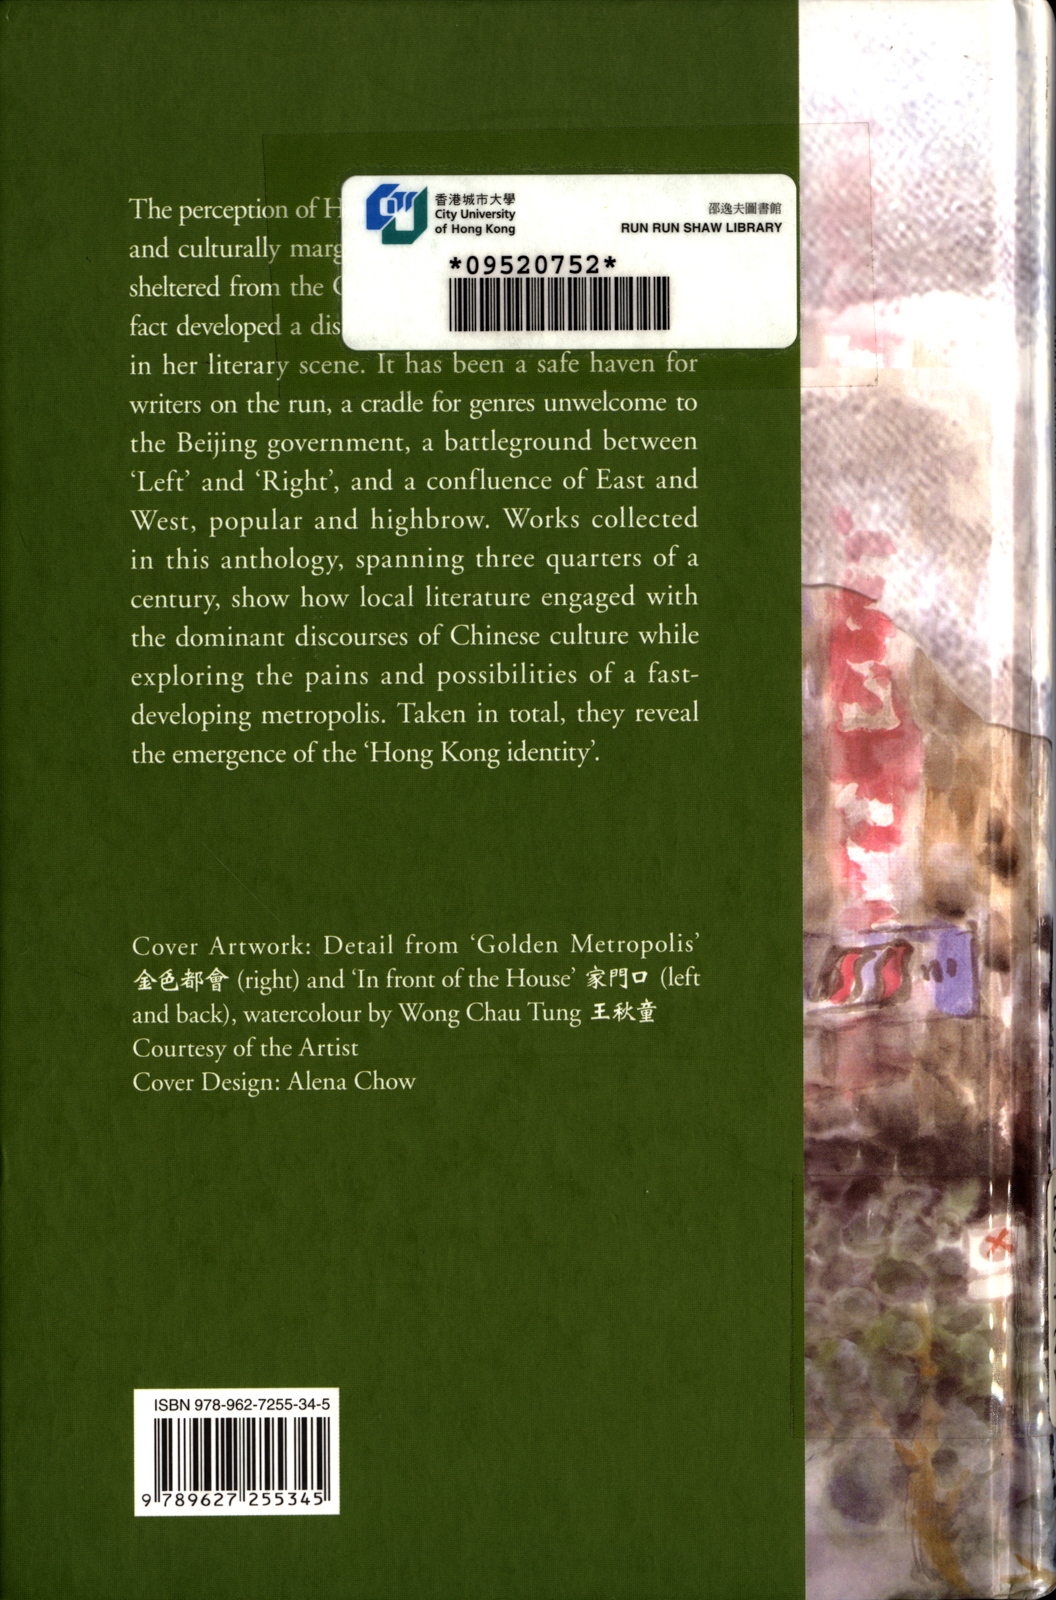 To Pierce the Material Screen: An Anthology of 20th-Century Hong Kong Literature, Volume II, Essays and Poetry